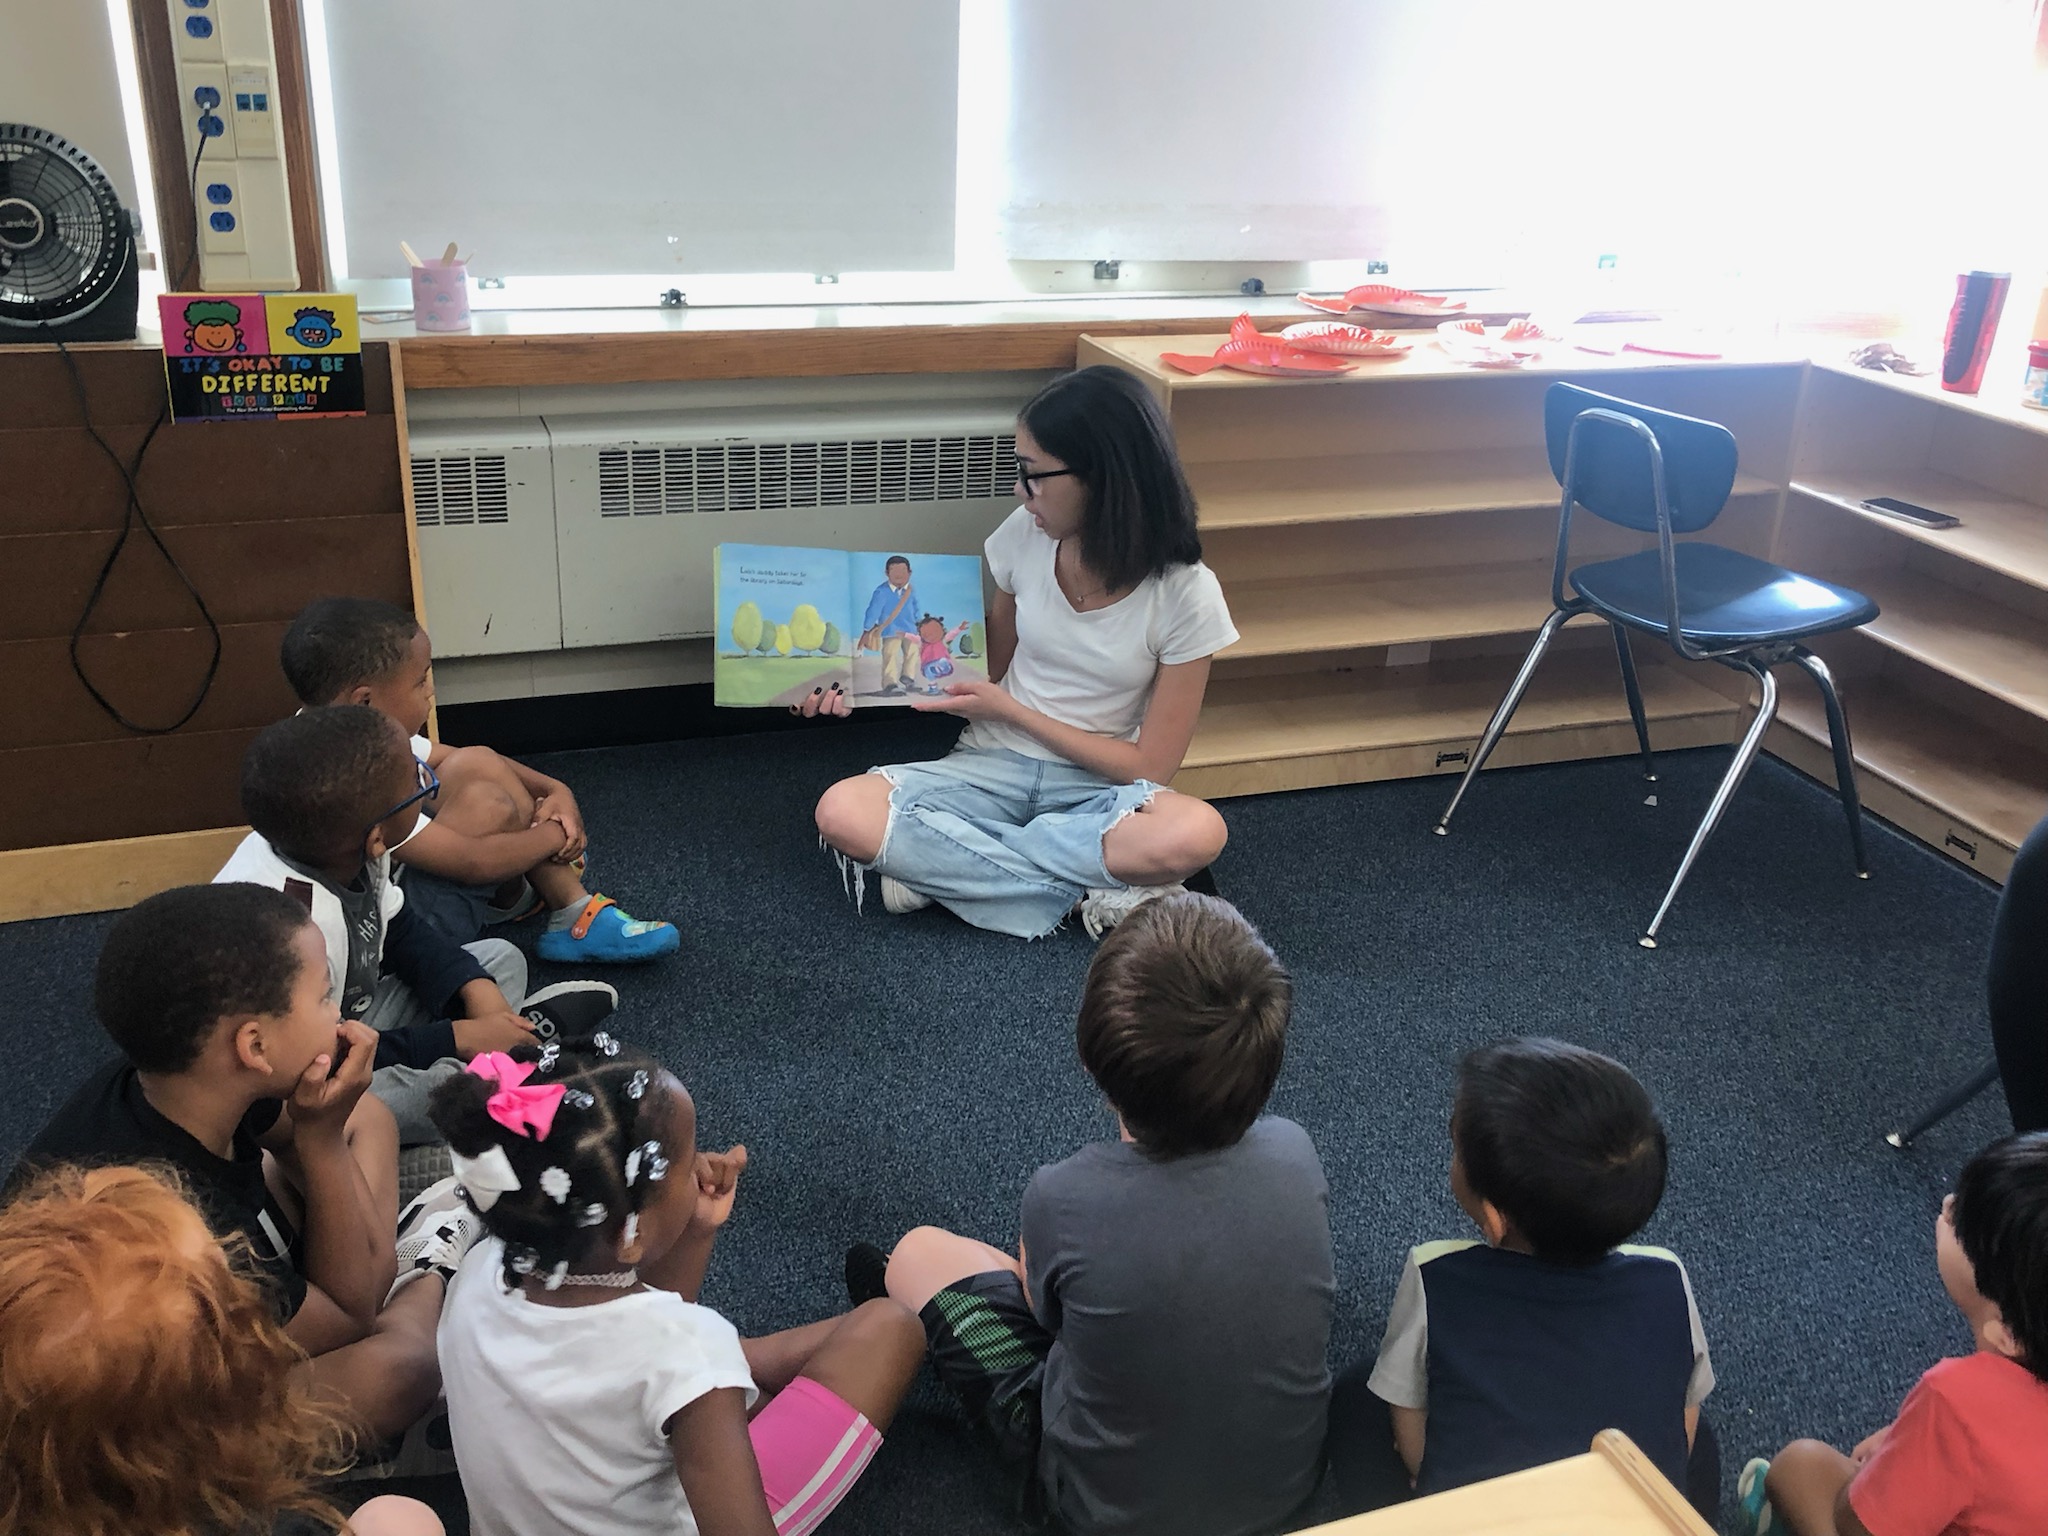 This is a photo of a high school student reading to a group of younger students, sitting in a circle around her as she holds up a book she is reading to them.